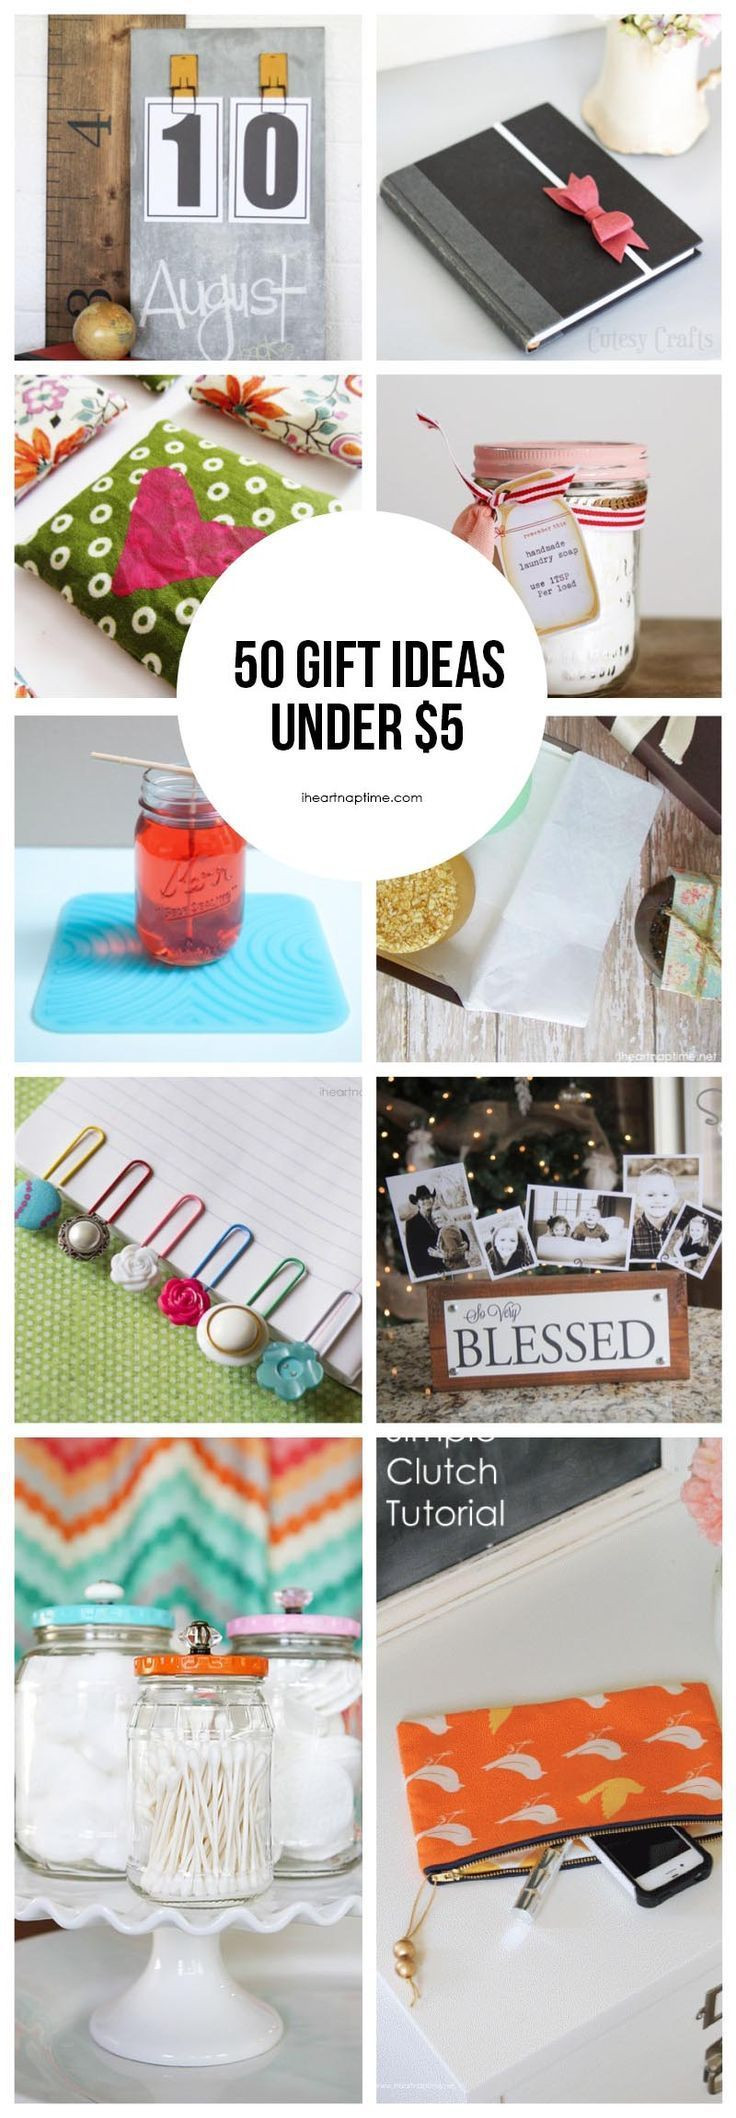 Christmas Gift Ideas Under $5
 50 homemade t ideas to make for under $5